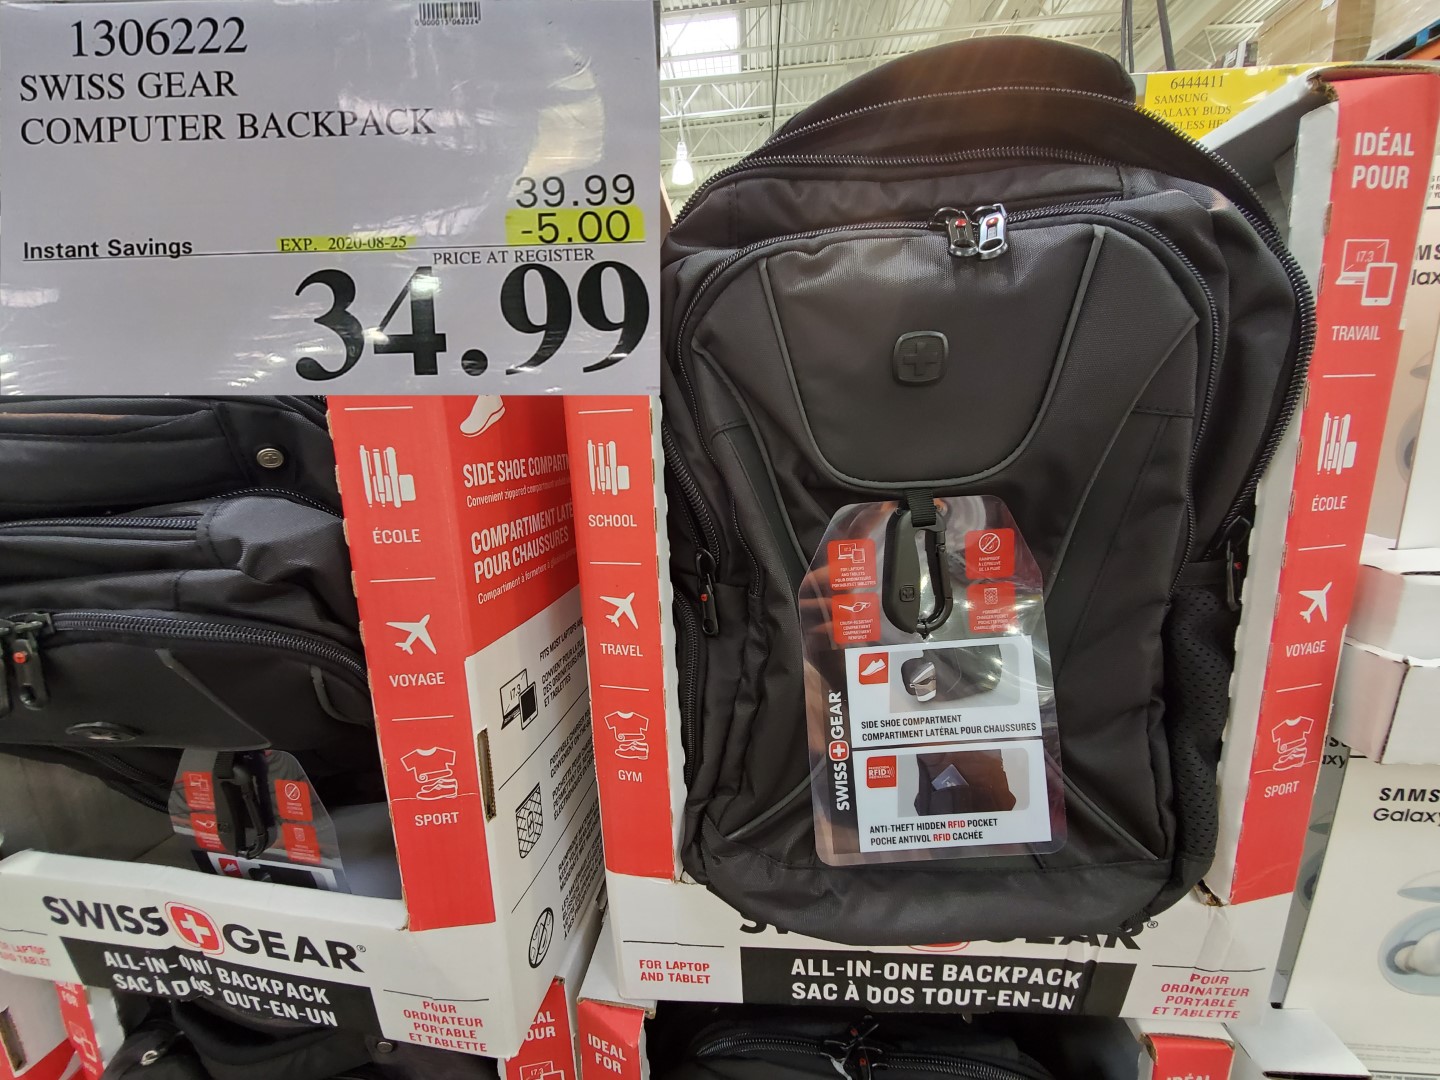 1306222 SWISS GEAR COMPUTER BACKPACK 5 00 INSTANT SAVINGS EXPIRES ON 2020  08 25 34 99 - Costco East Fan Blog